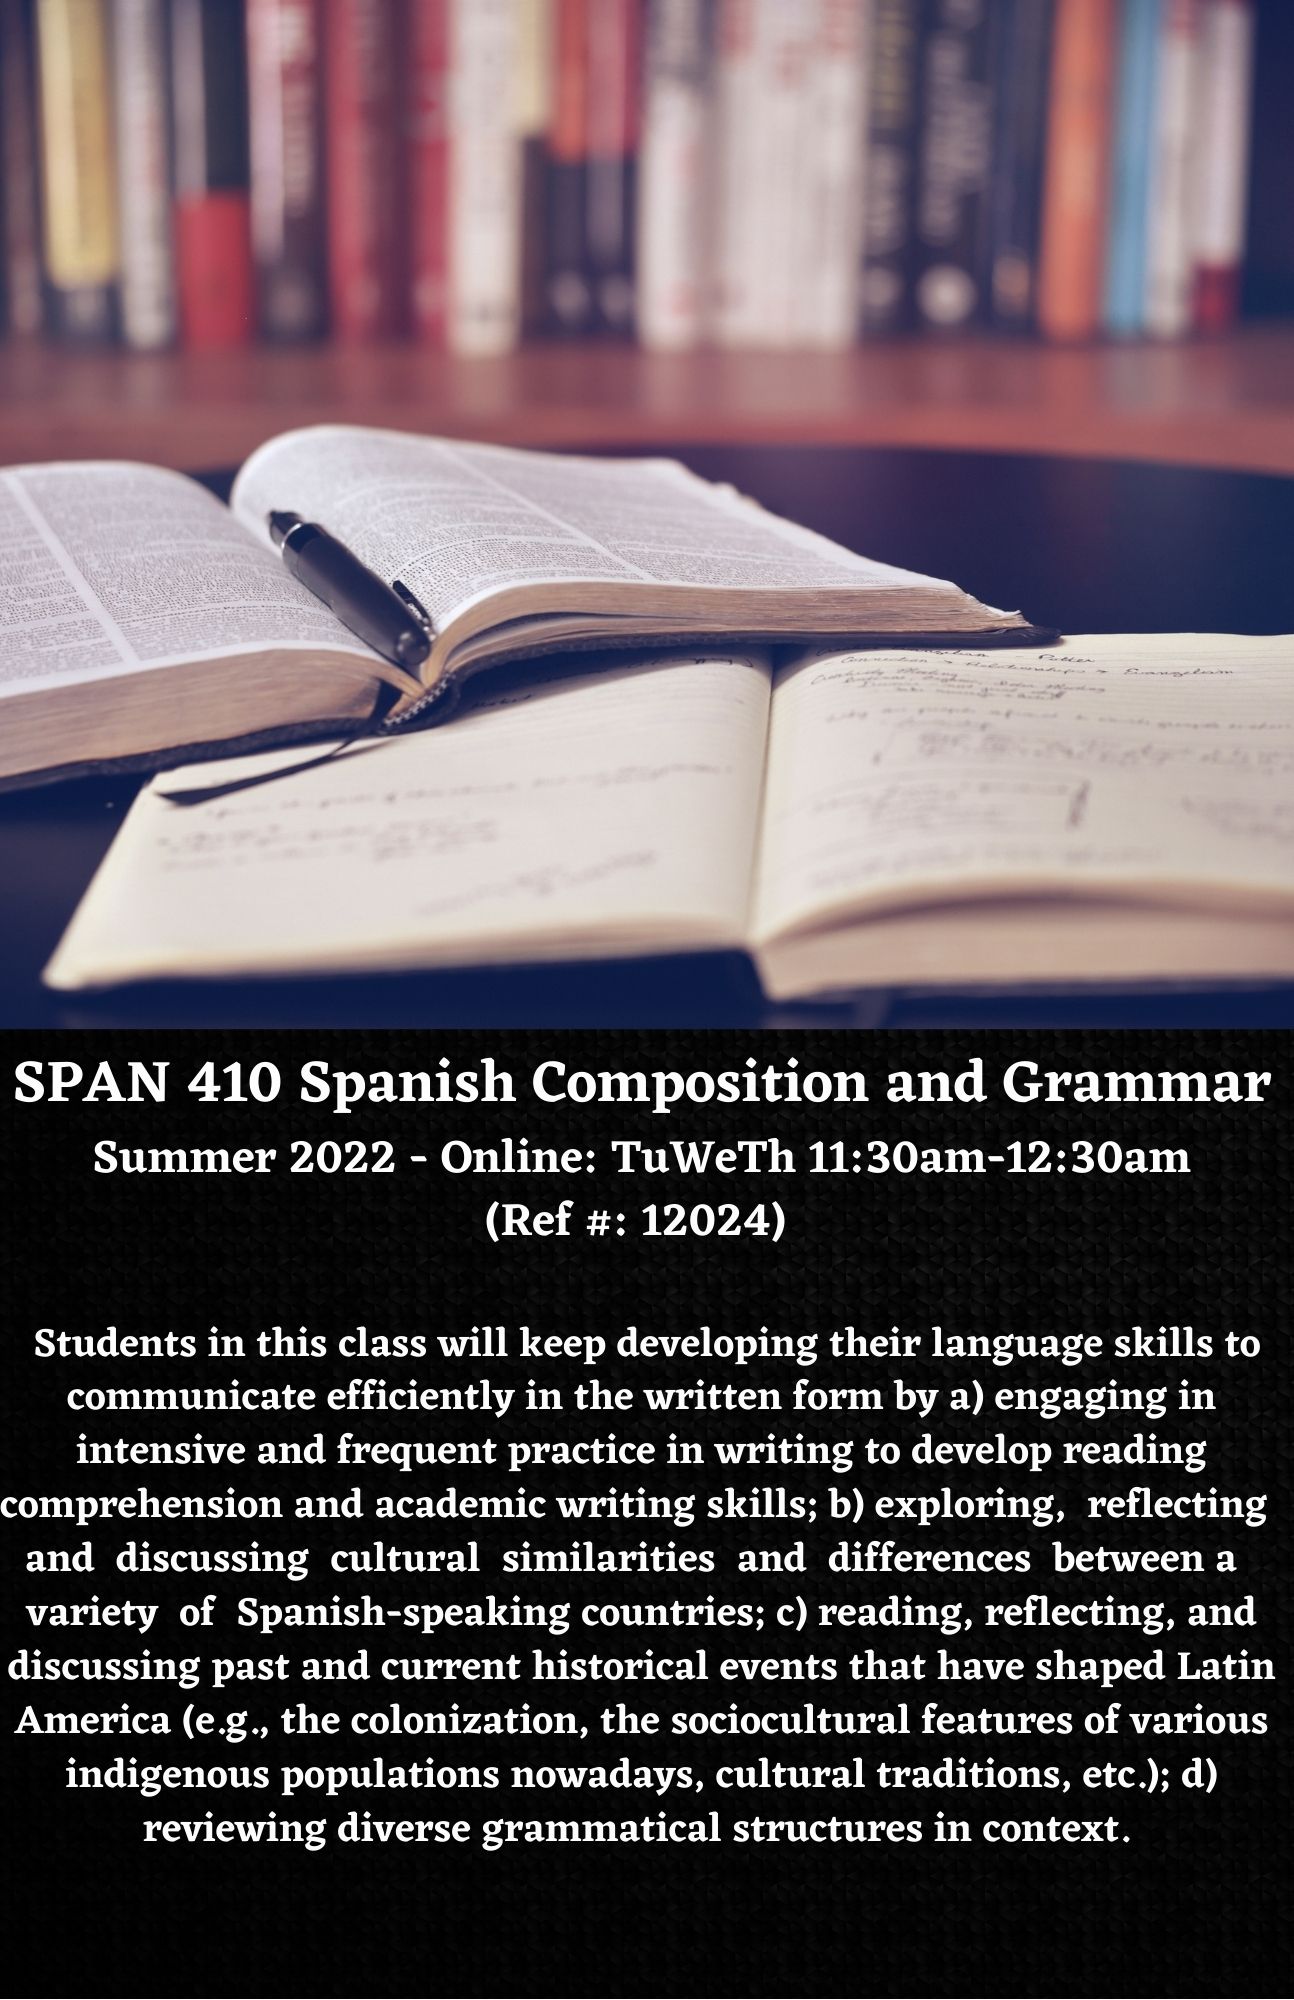 SPAN 410 Spanish Composition and Grammar Summer 2022 - Online: TuWeTh 11:30am-12:30am (Ref #: 12024)    Students in this class will keep developing their language skills to communicate efficiently in the written form by a) engaging in intensive and frequent practice in writing to develop reading comprehension and academic writing skills; b) exploring,  reflecting  and  discussing  cultural  similarities  and  differences  between a  variety  of  Spanish-speaking countries; c) reading, reflecting, and discussing past and current historical events that have shaped Latin America (e.g., the colonization, the sociocultural features of various indigenous populations nowadays, cultural traditions, etc.); d) reviewing diverse grammatical structures in context.